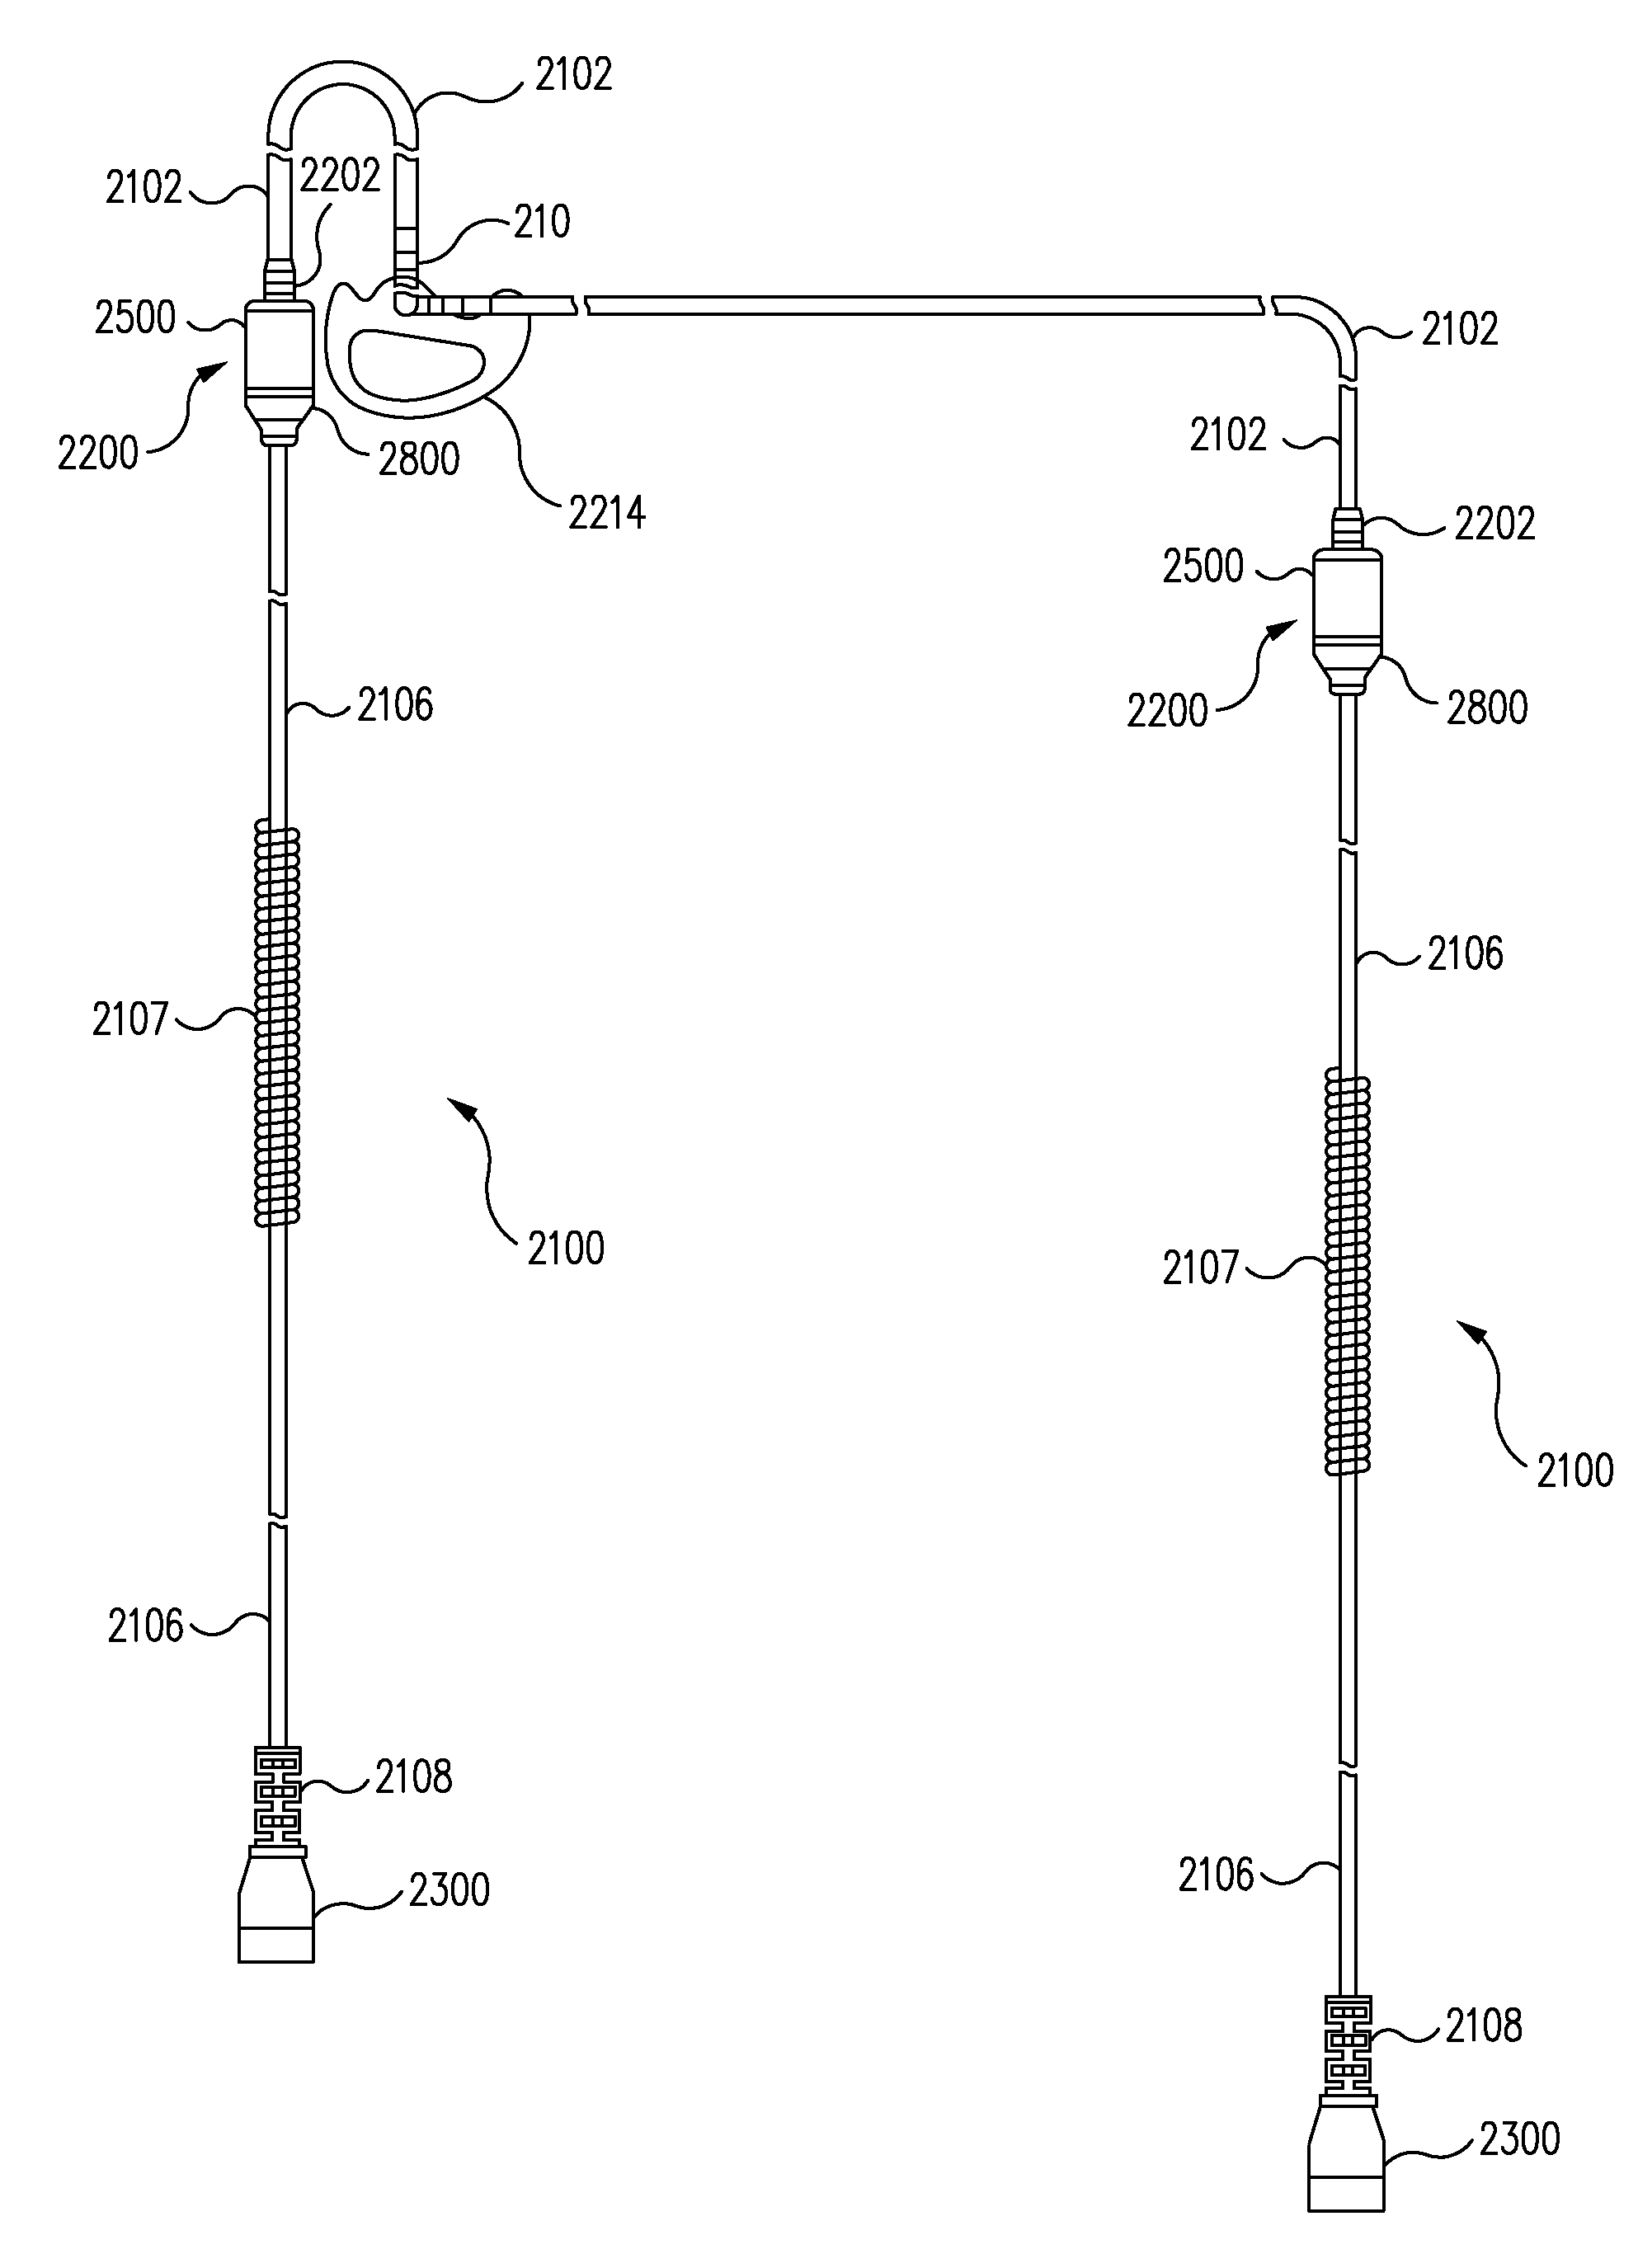 Cable assembly with earpiece